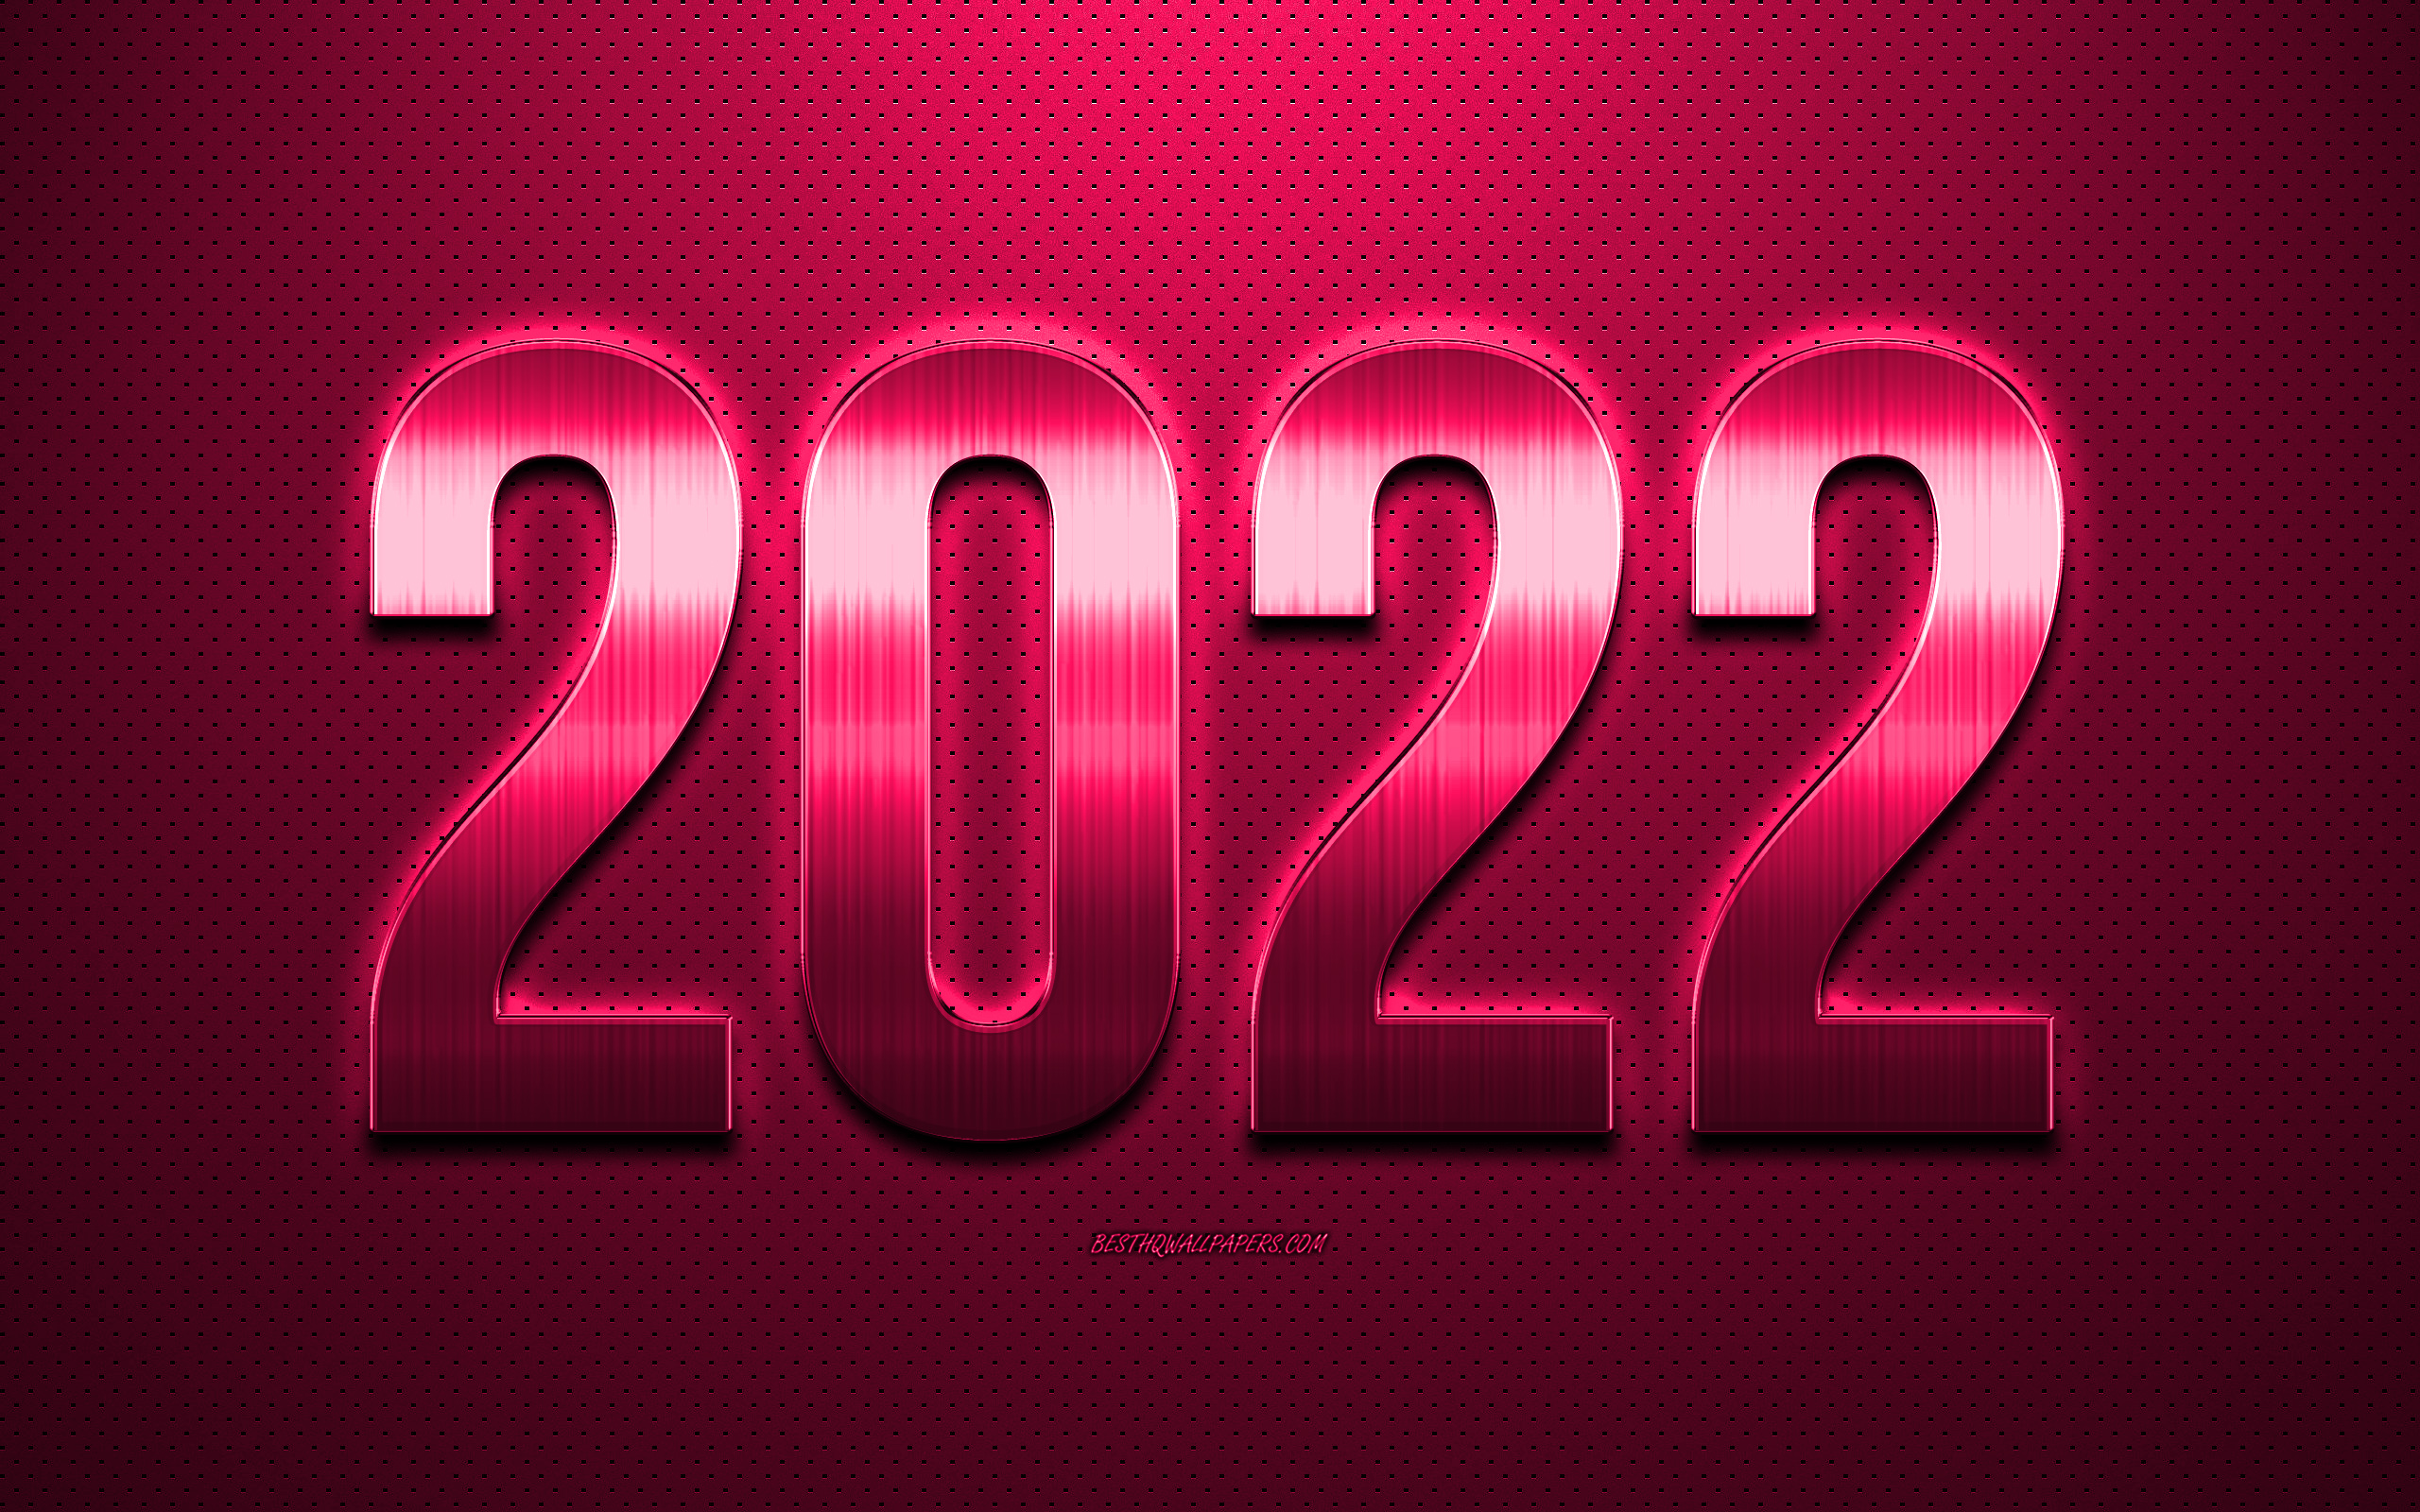 Wallpapers 2022 holiday congratulations on the year 2022 on the desktop